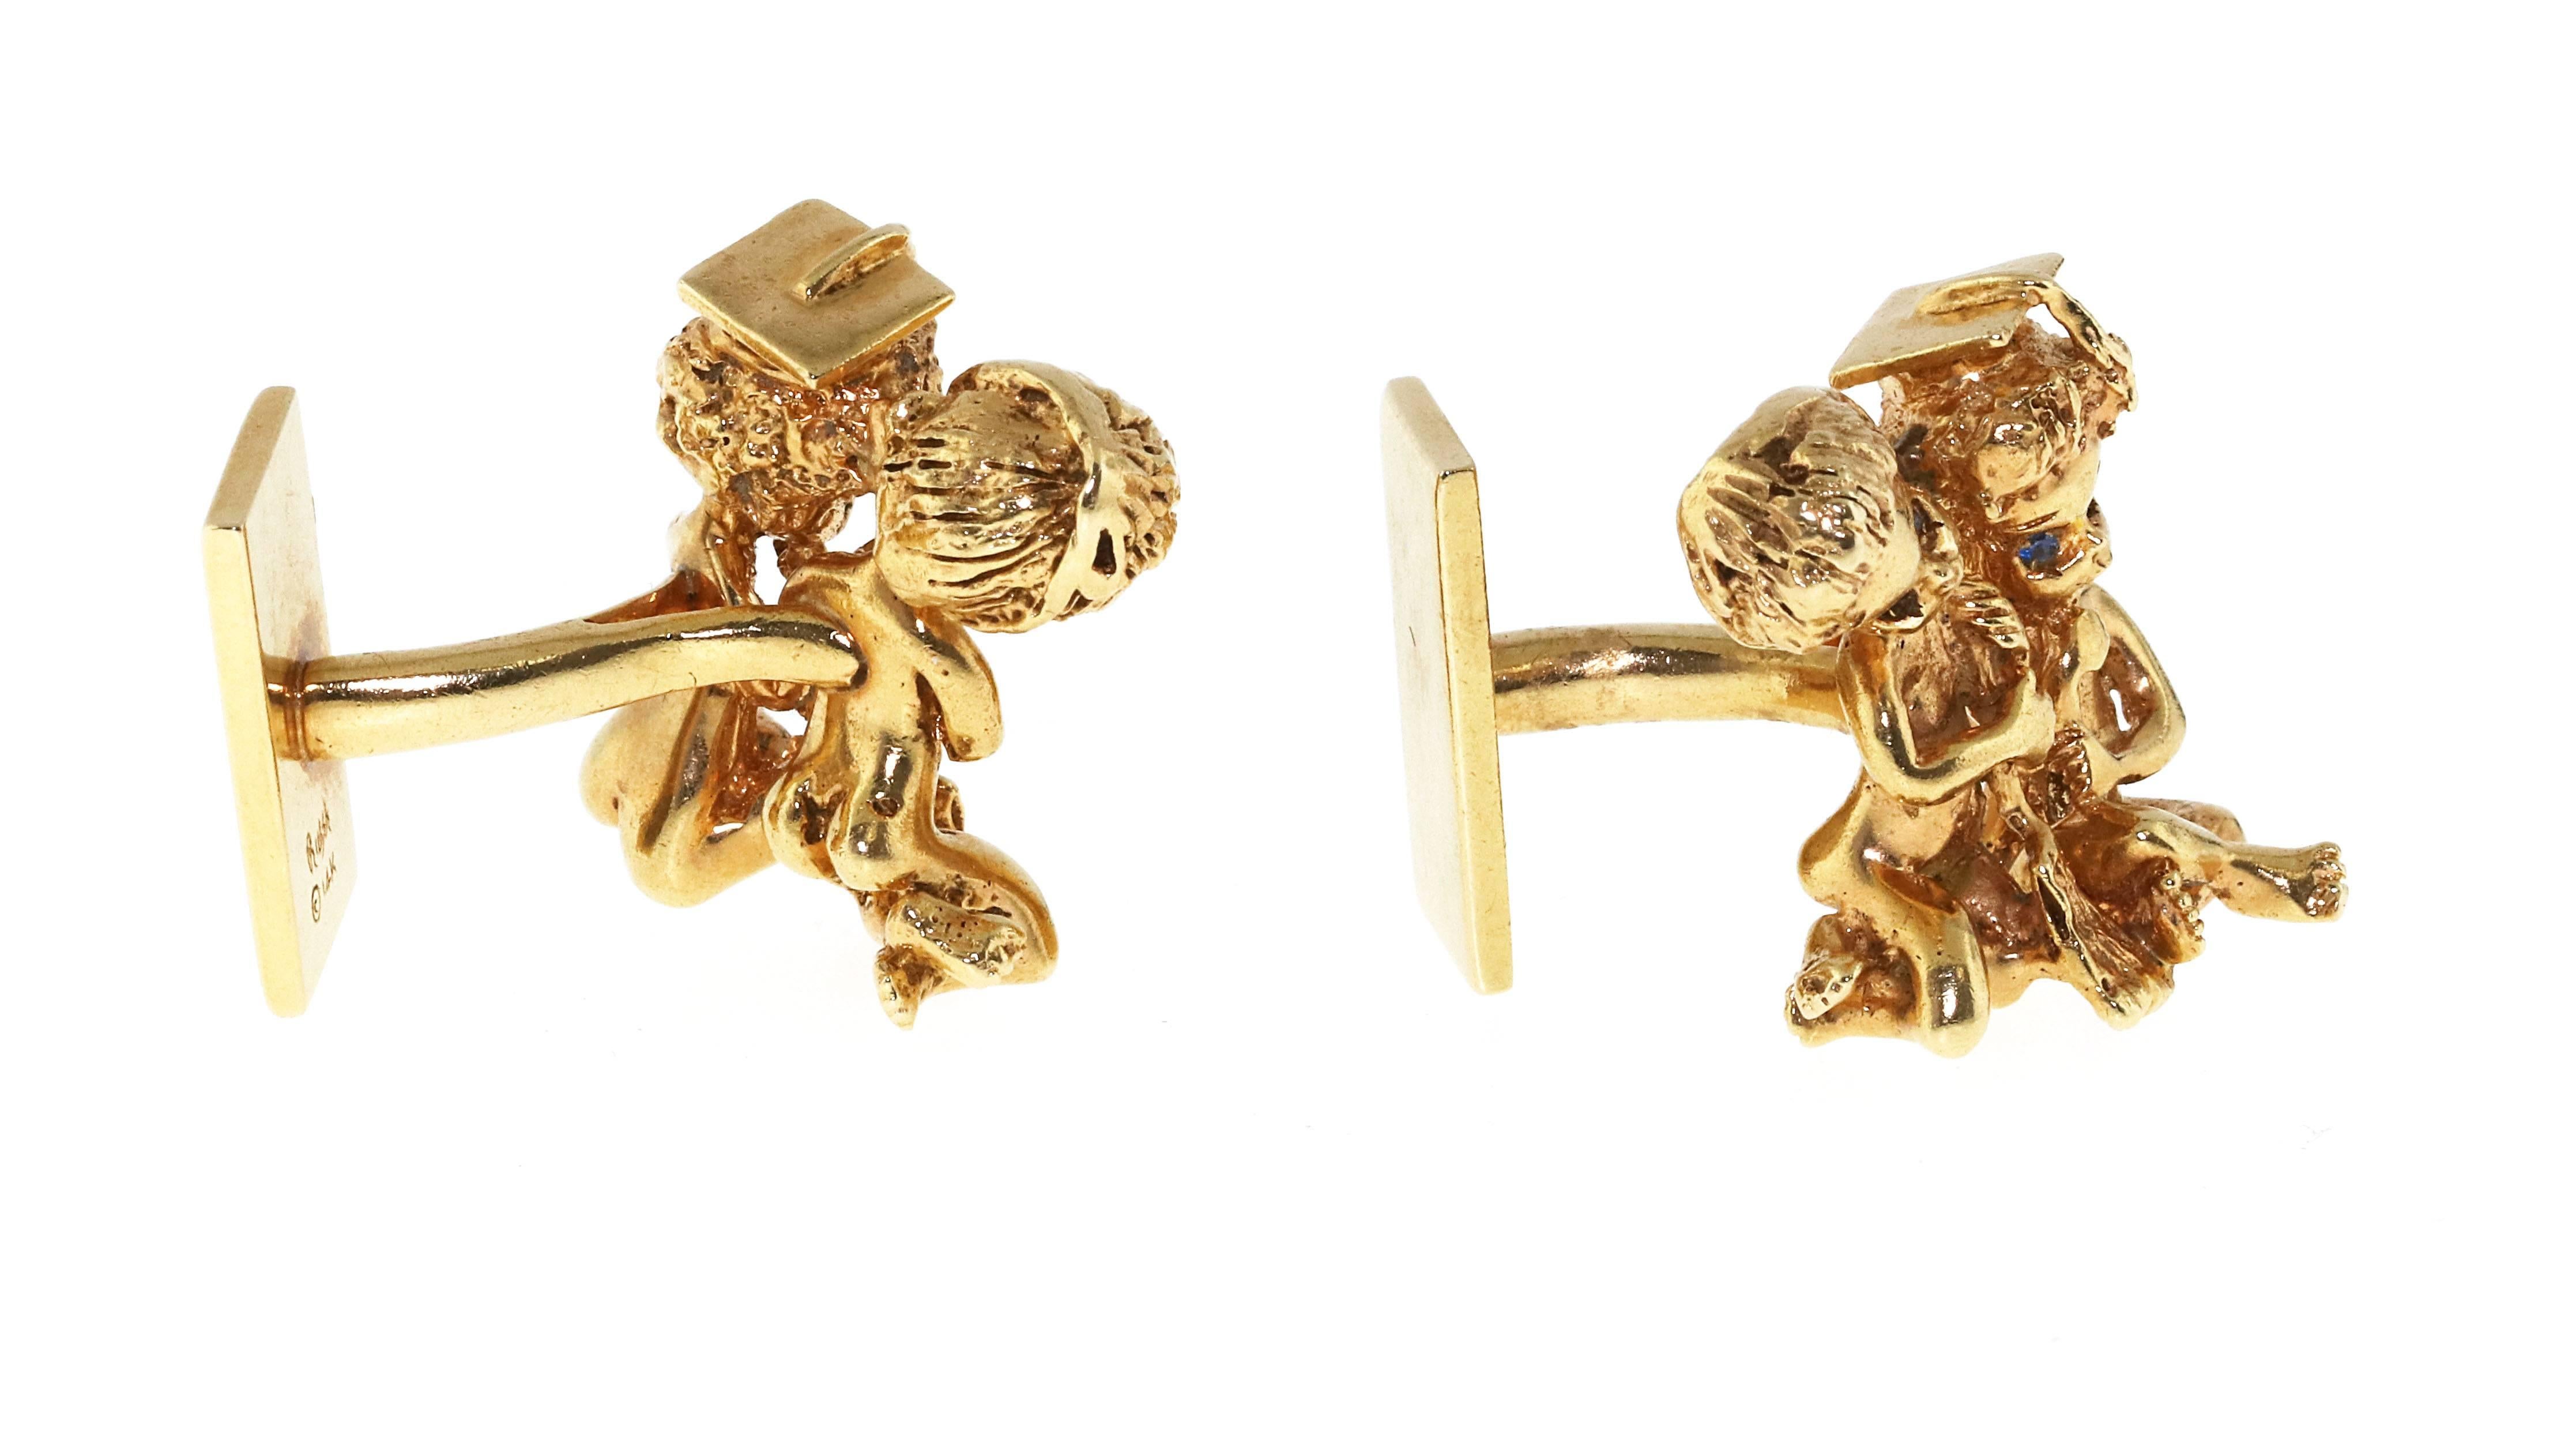 Pair of William Ruser cufflinks meticulously crafted from 14 karat yellow gold. The famous American designer is know for his charming angel motif jewelry. The cufflinks are a matched pair, each with 2 “Ruser Angels”. The angels have blue sapphire